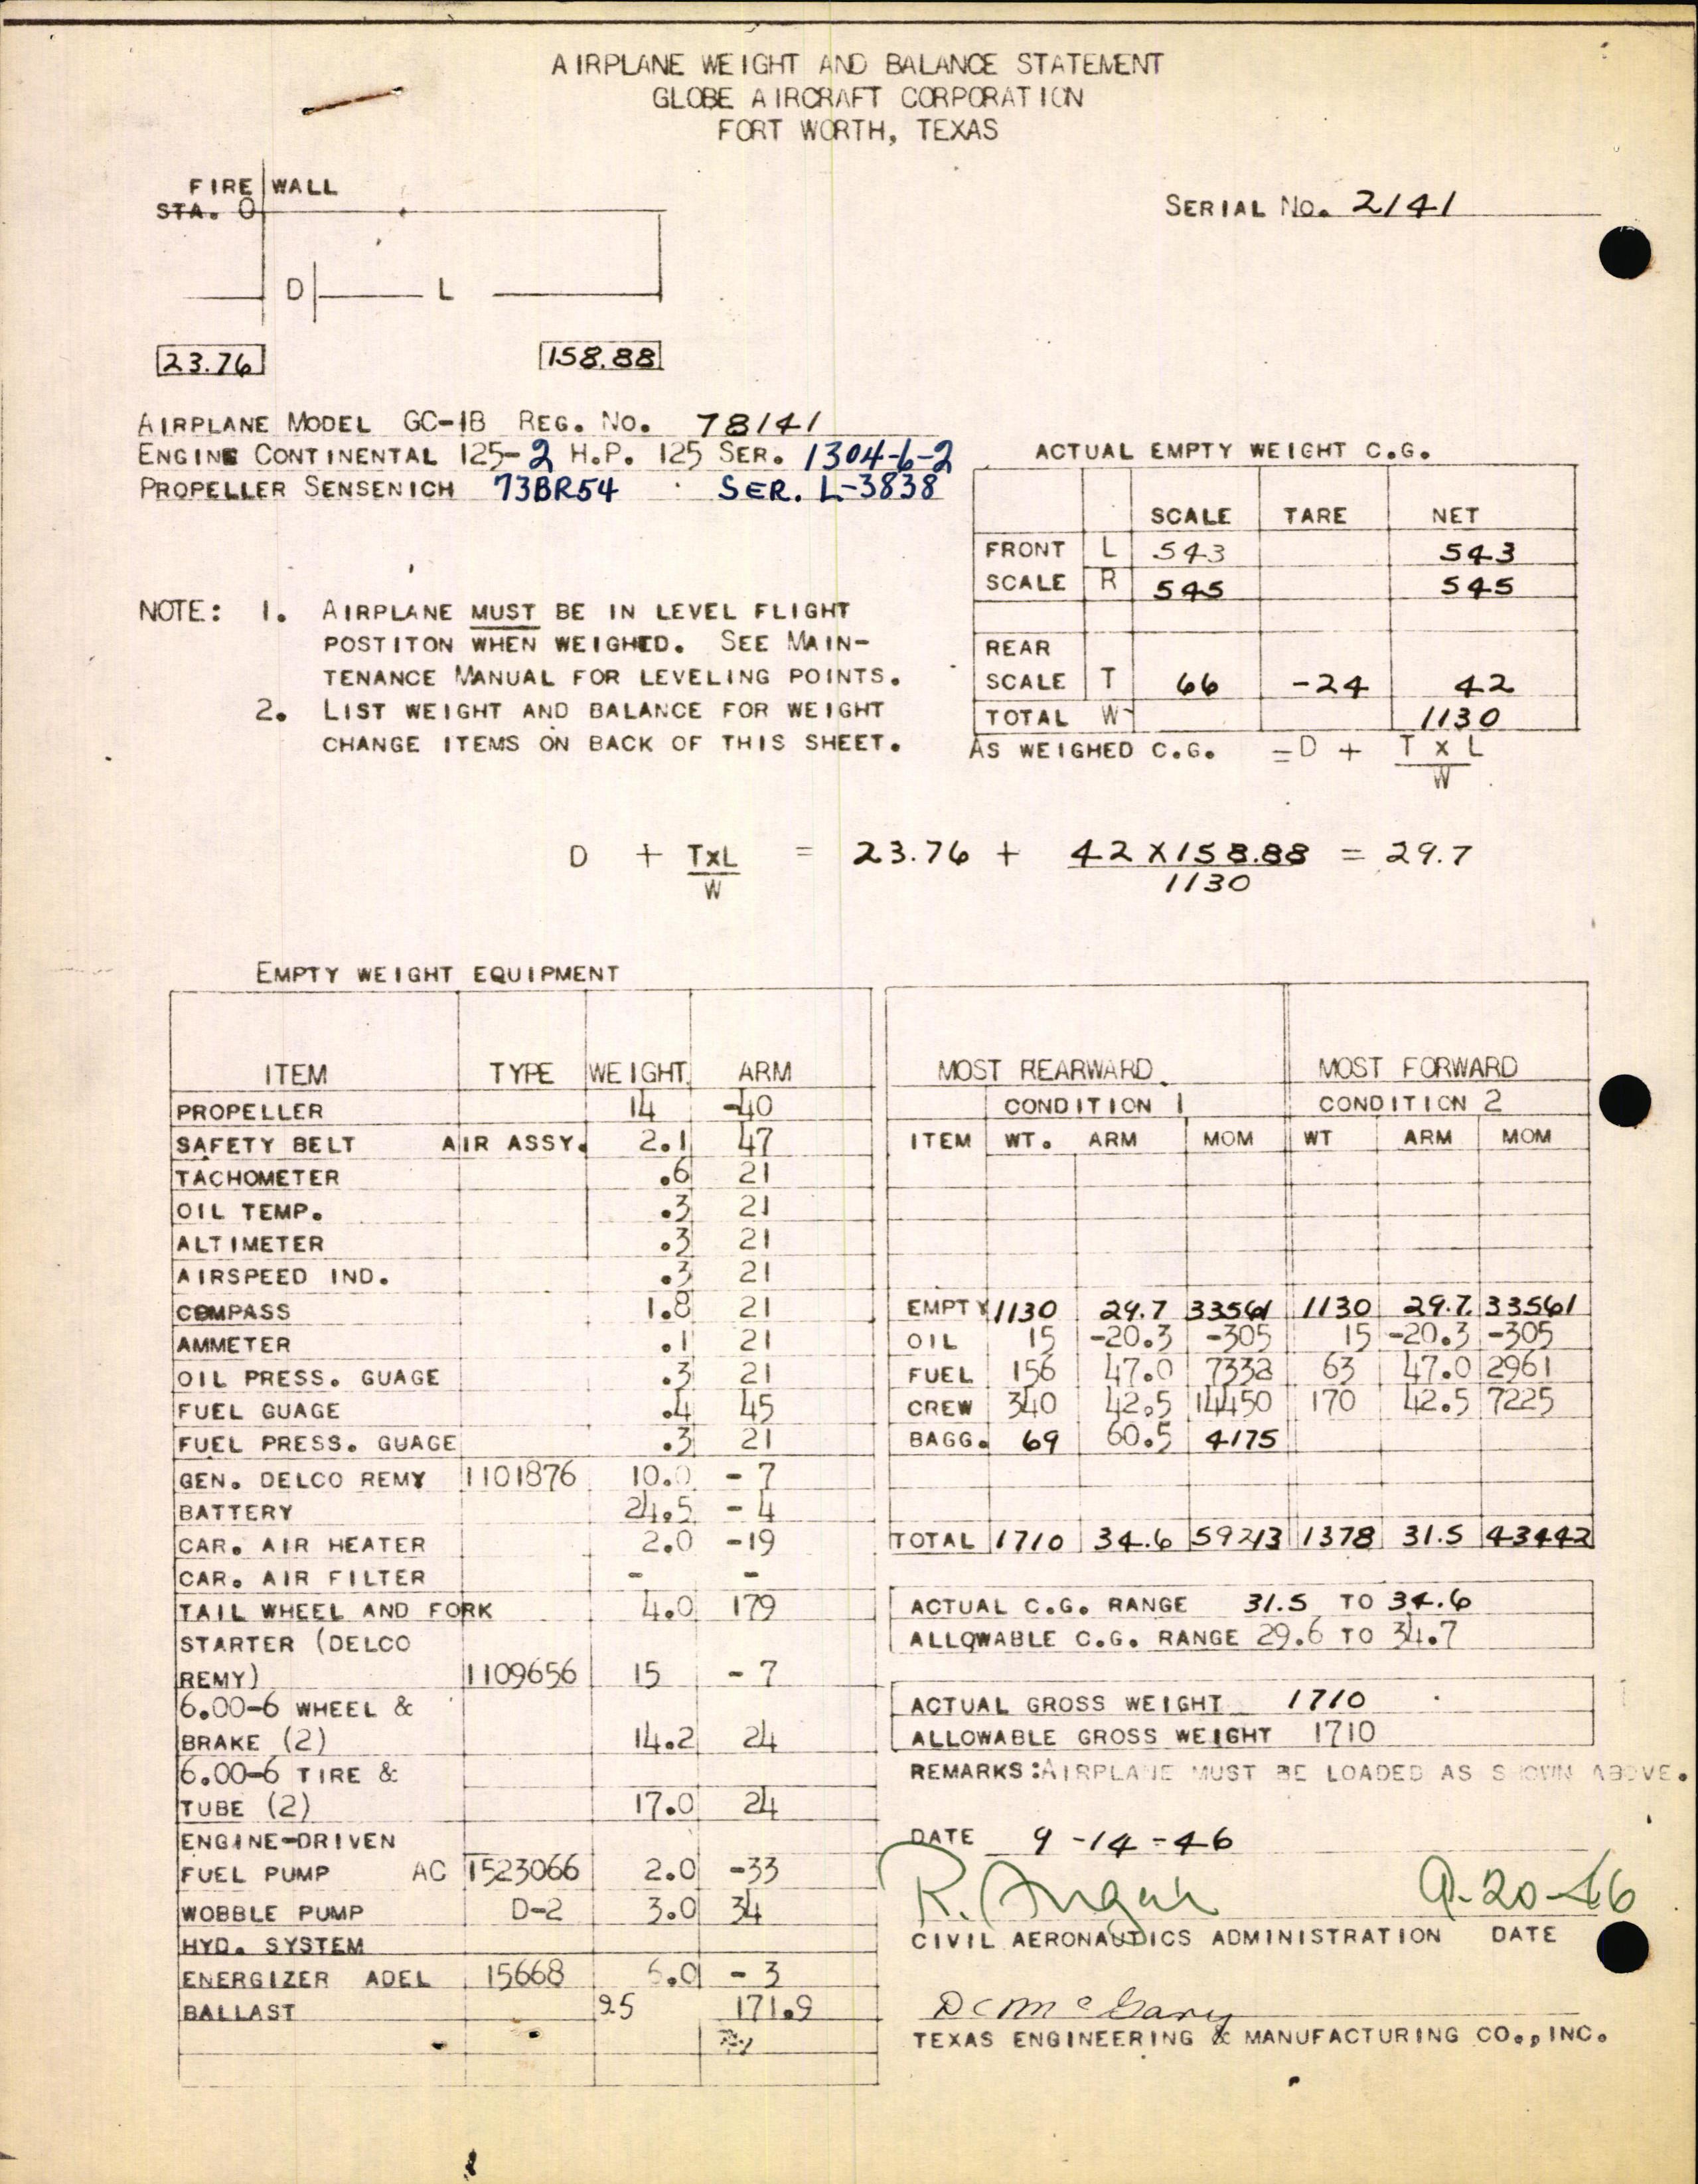 Sample page 3 from AirCorps Library document: Technical Information for Serial Number 2141